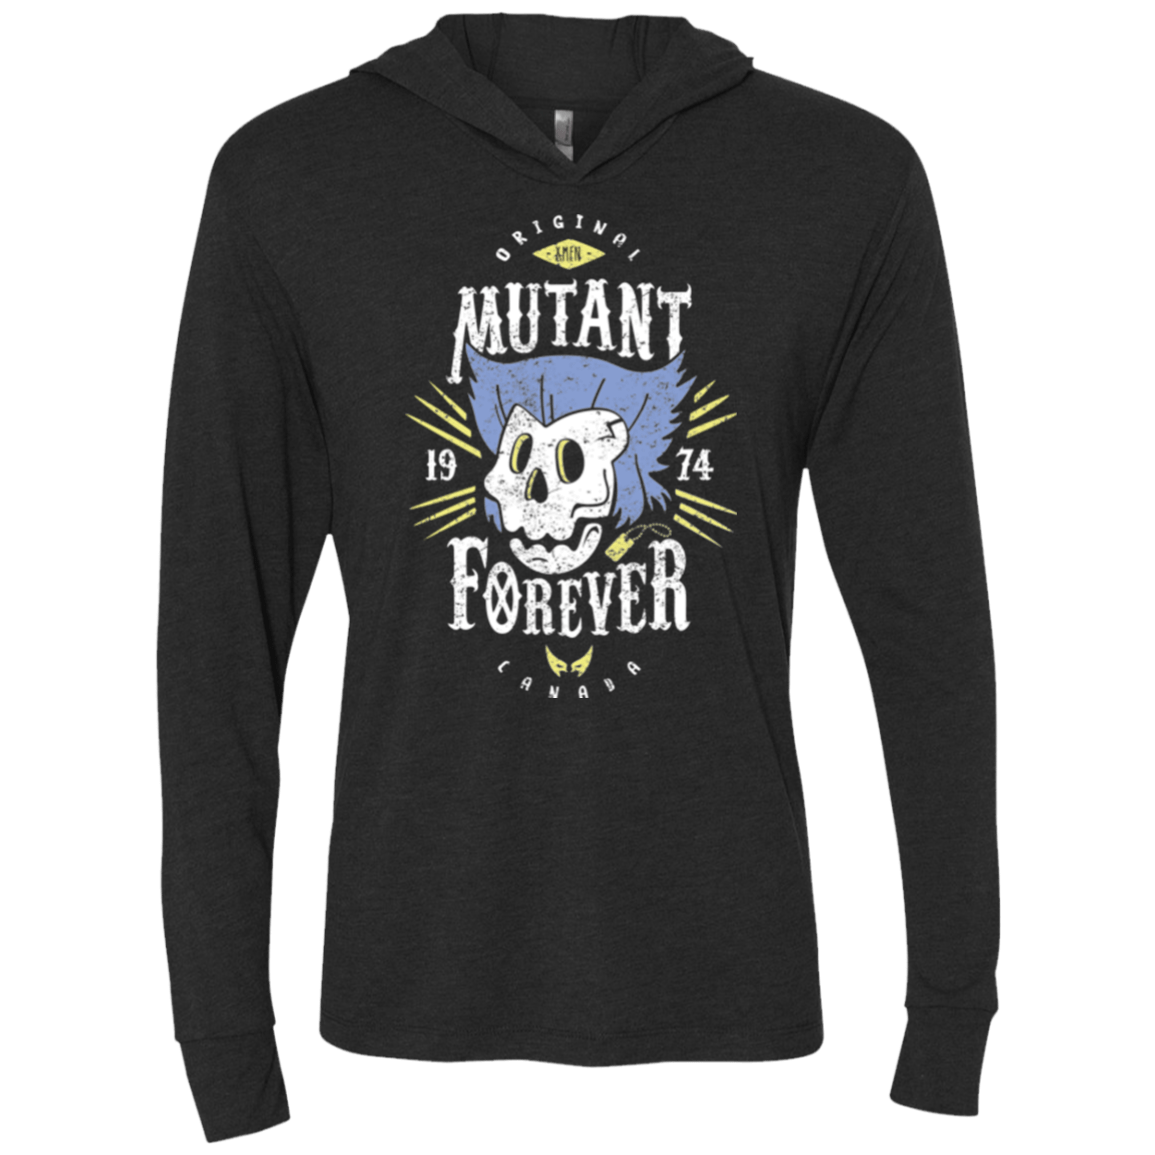 T-Shirts Vintage Black / X-Small Mutant Forever Triblend Long Sleeve Hoodie Tee